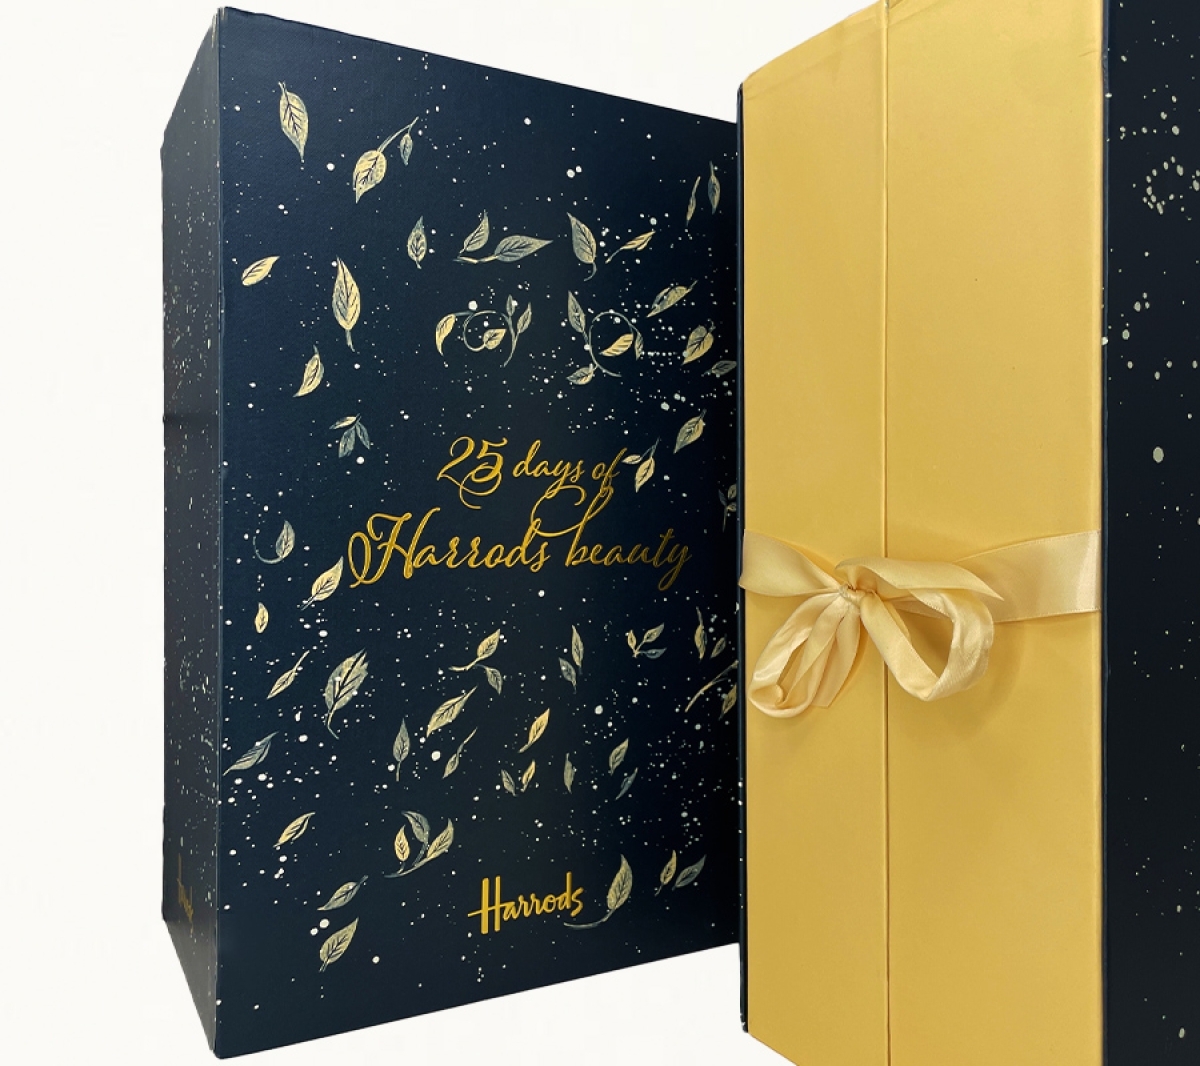 Harrods-luxury-advent-calendar-case-study-branded-outer-cover-case